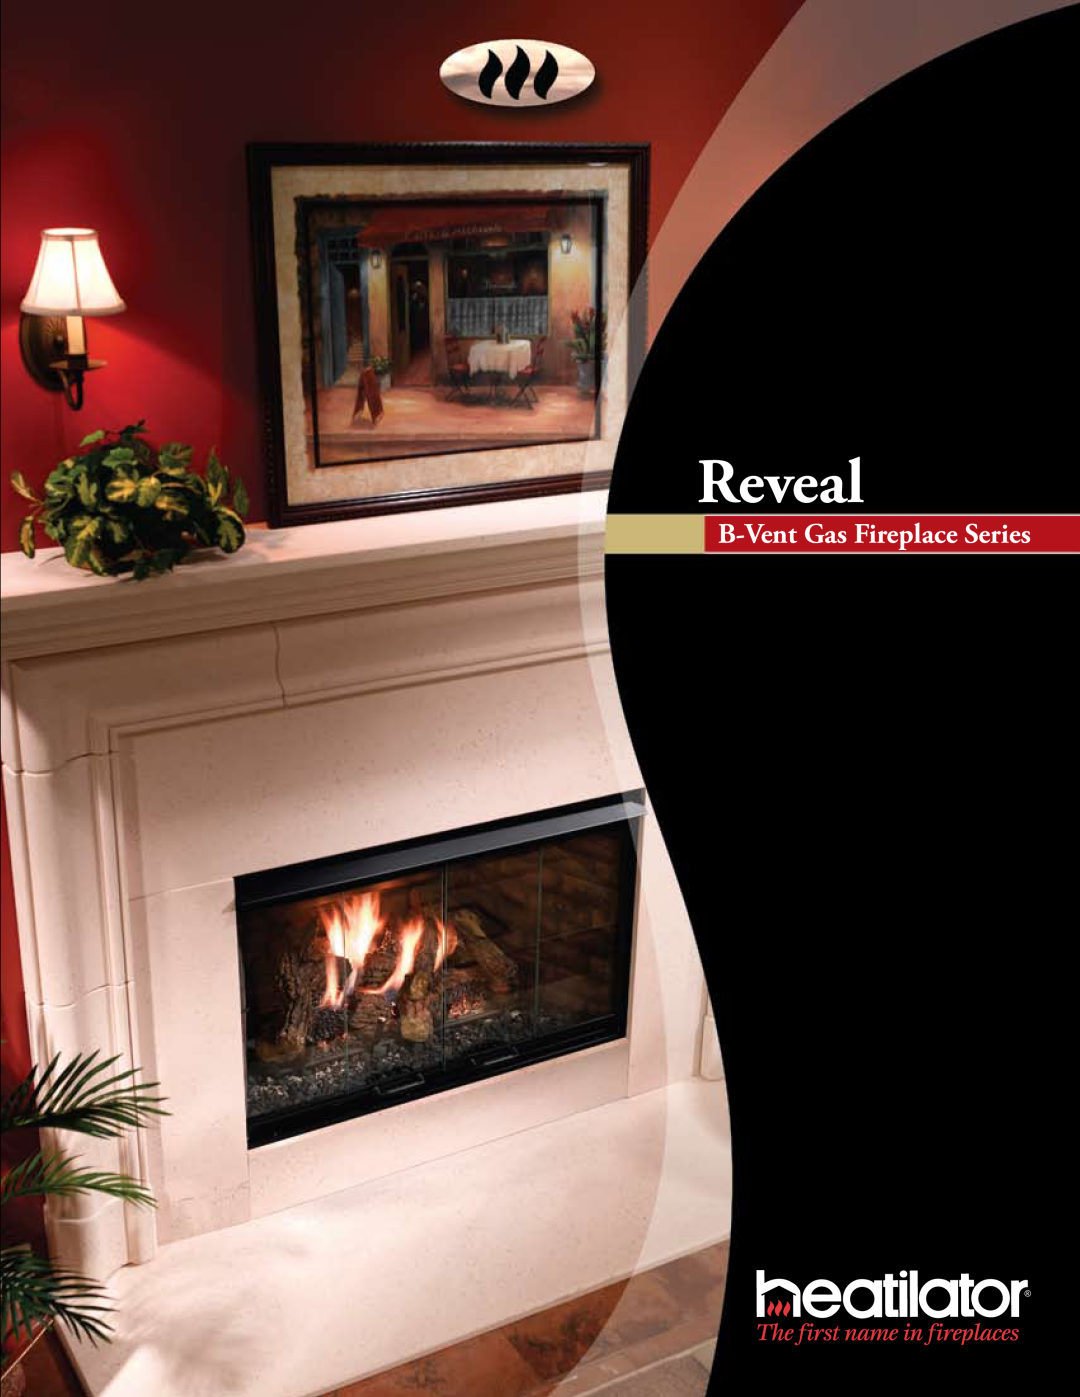 Hearth and Home Technologies RBV4236I manual Reveal, B-Vent Gas Fireplace Series 